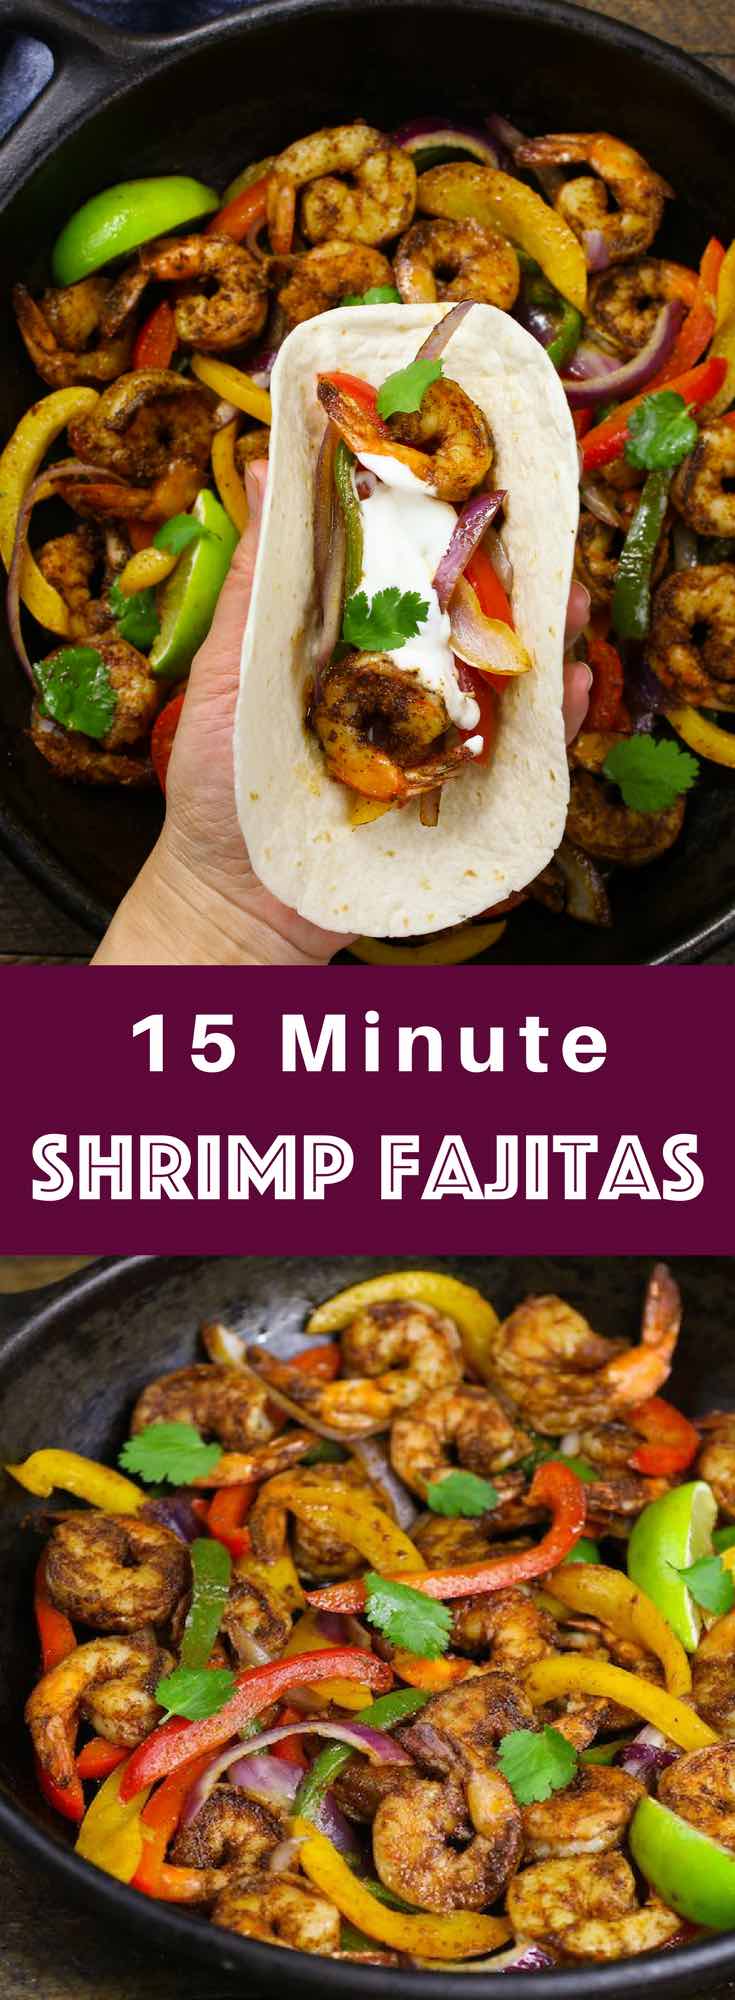 These Shrimp Fajitas are easy to make in just 15 minutes – sizzling, caramelized shrimp cooked with seared bell peppers and onions in flavorful fajita seasonings. It’s like restaurant-style fajitas but even better!